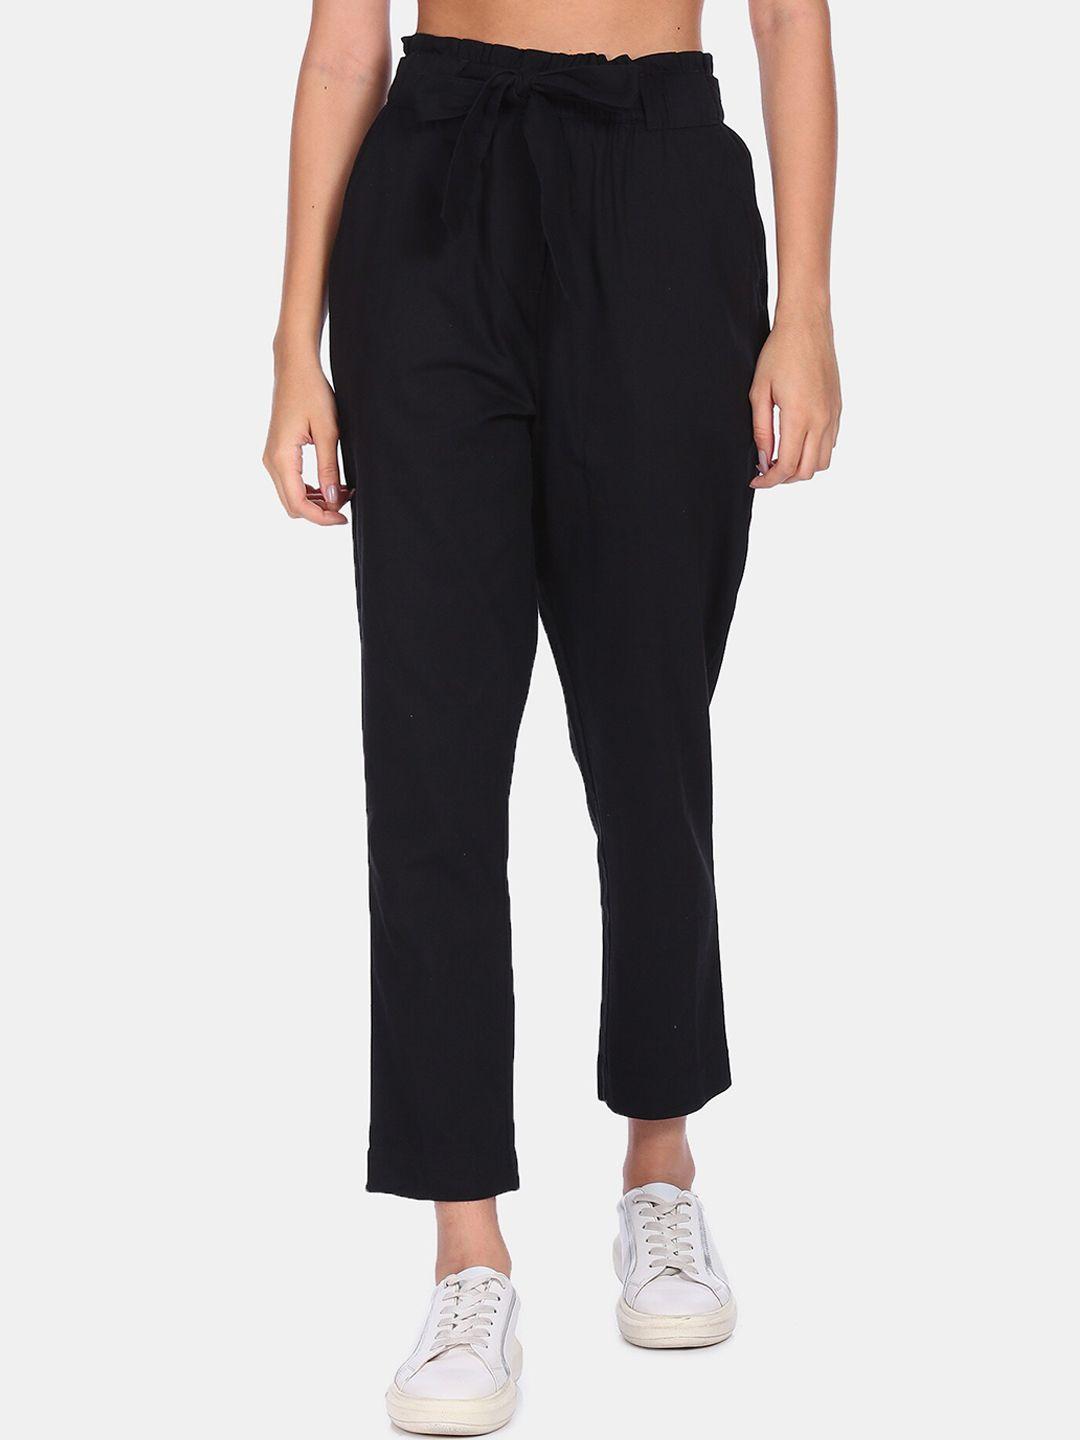 flying-machine-women-black-solid-mid-rise-pleated-trousers